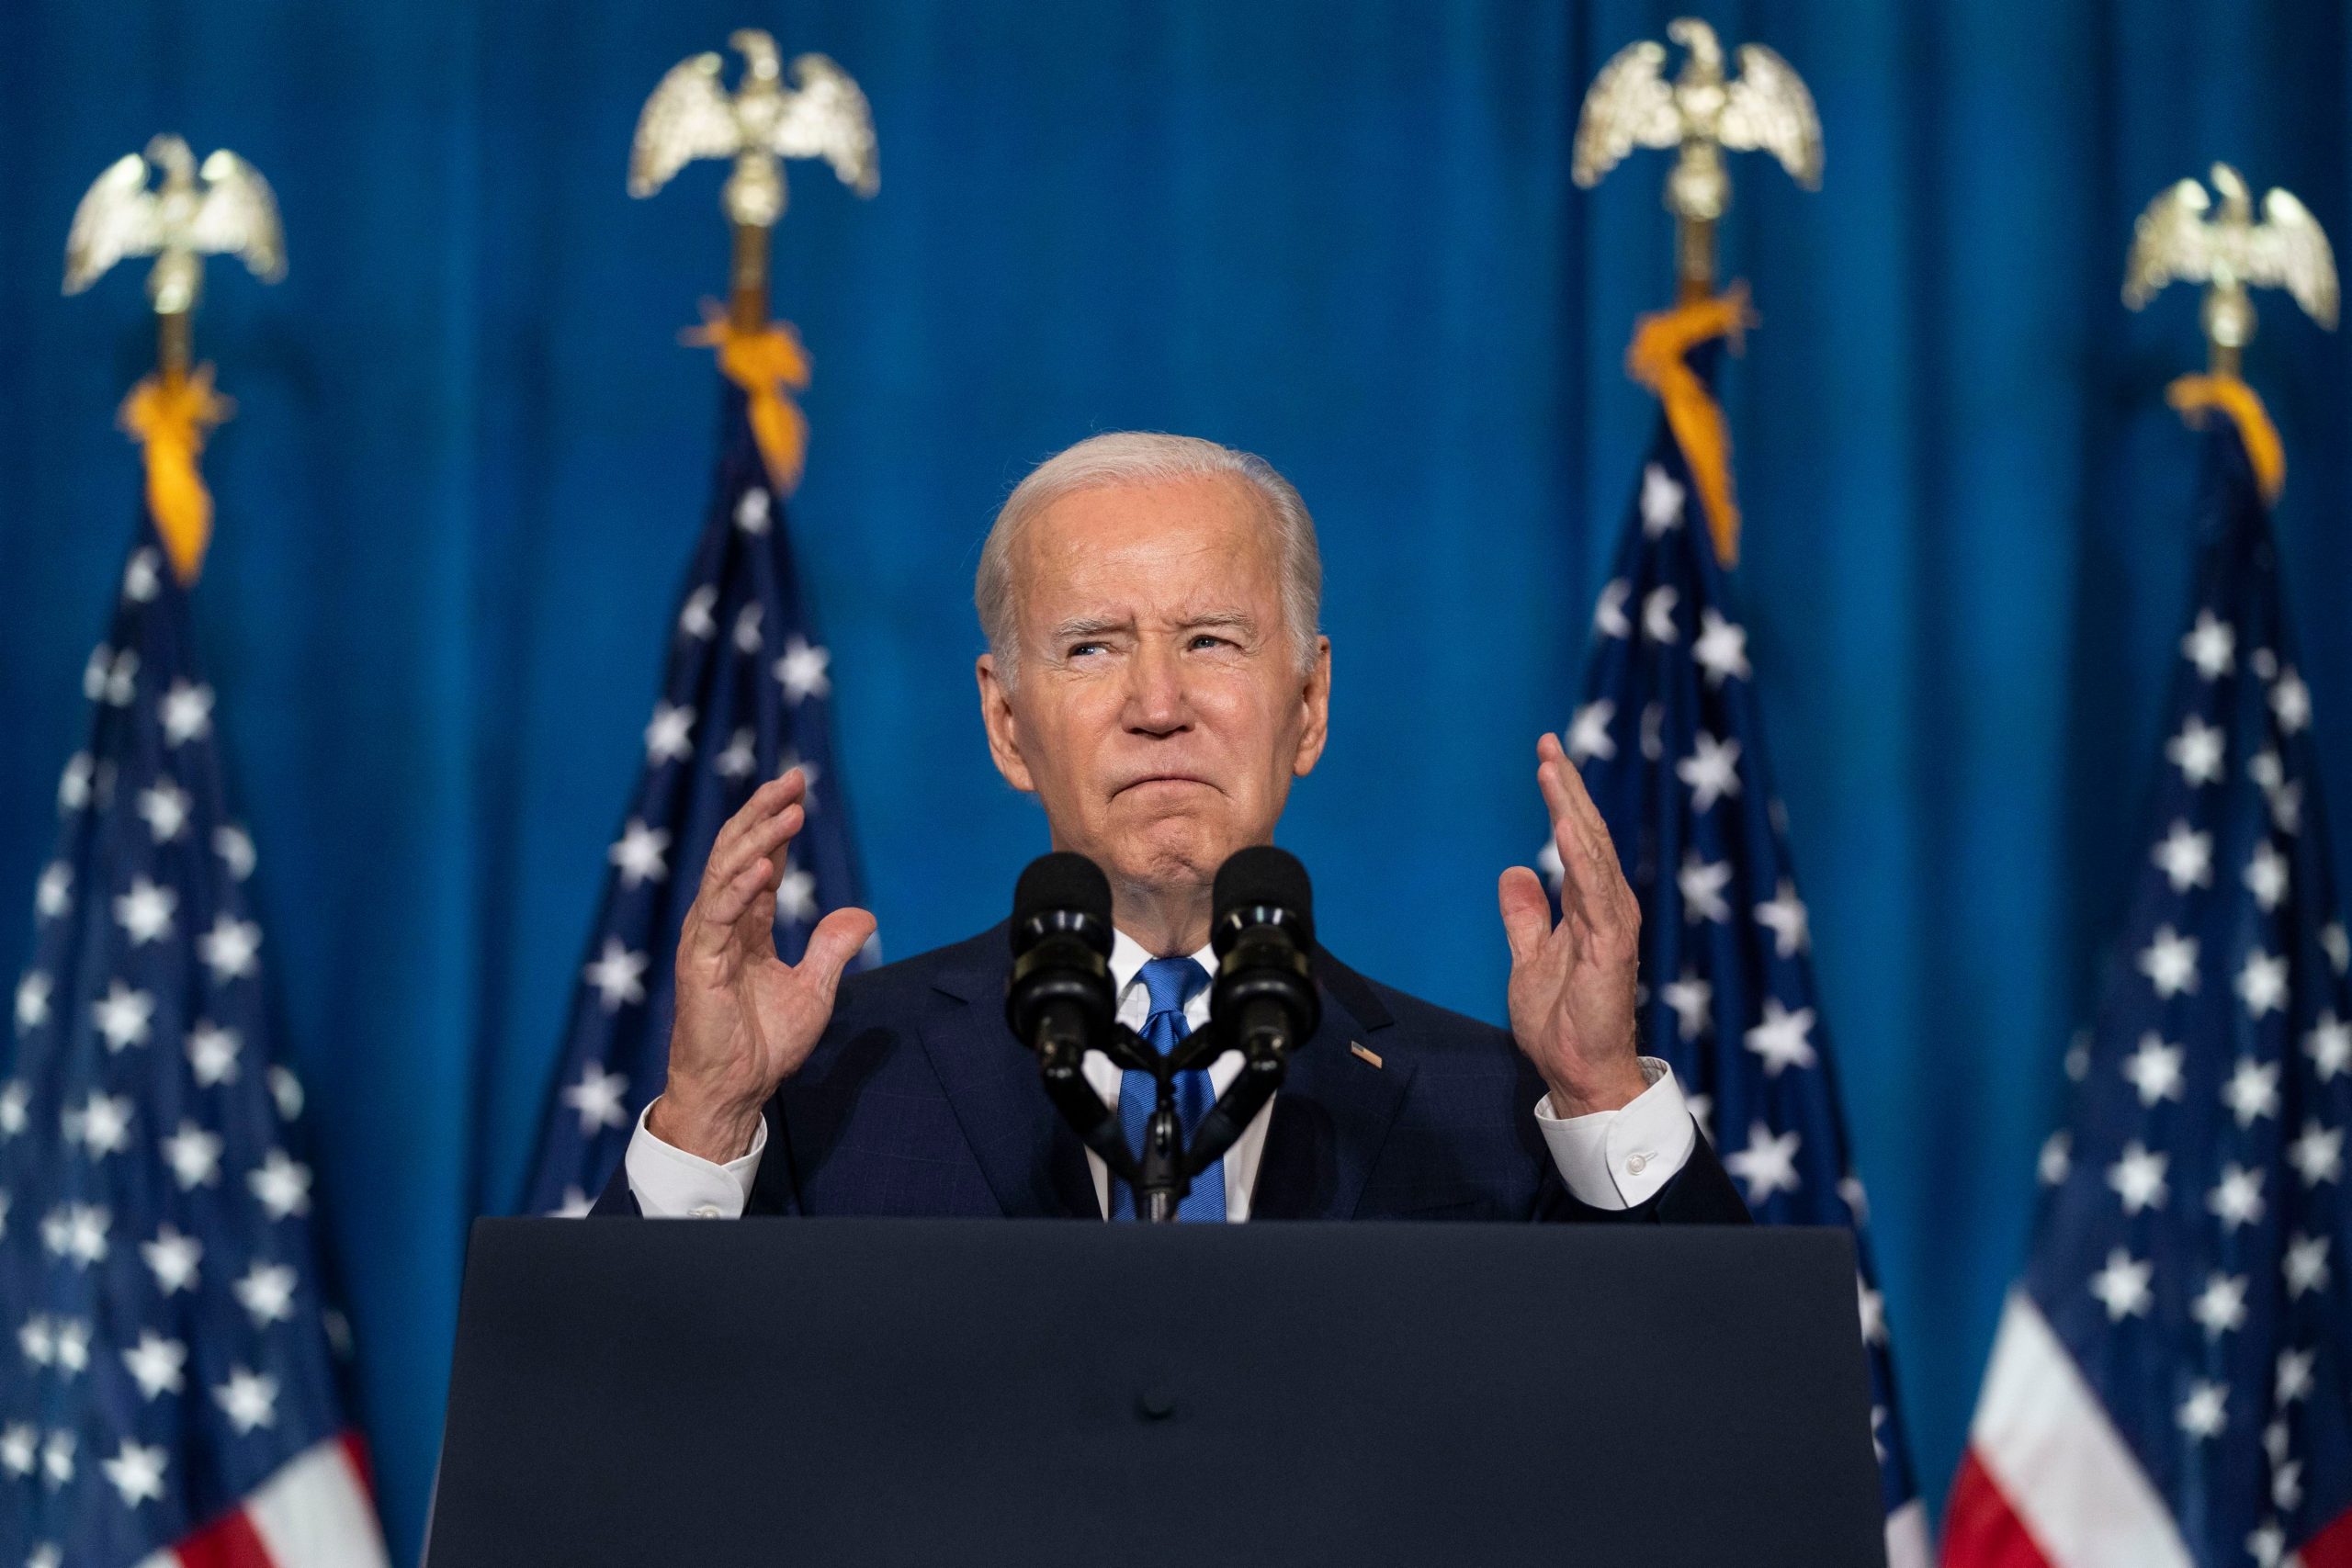 Joe Biden says ‘Red Wave’ didn’t happen in first speech after midterm elections